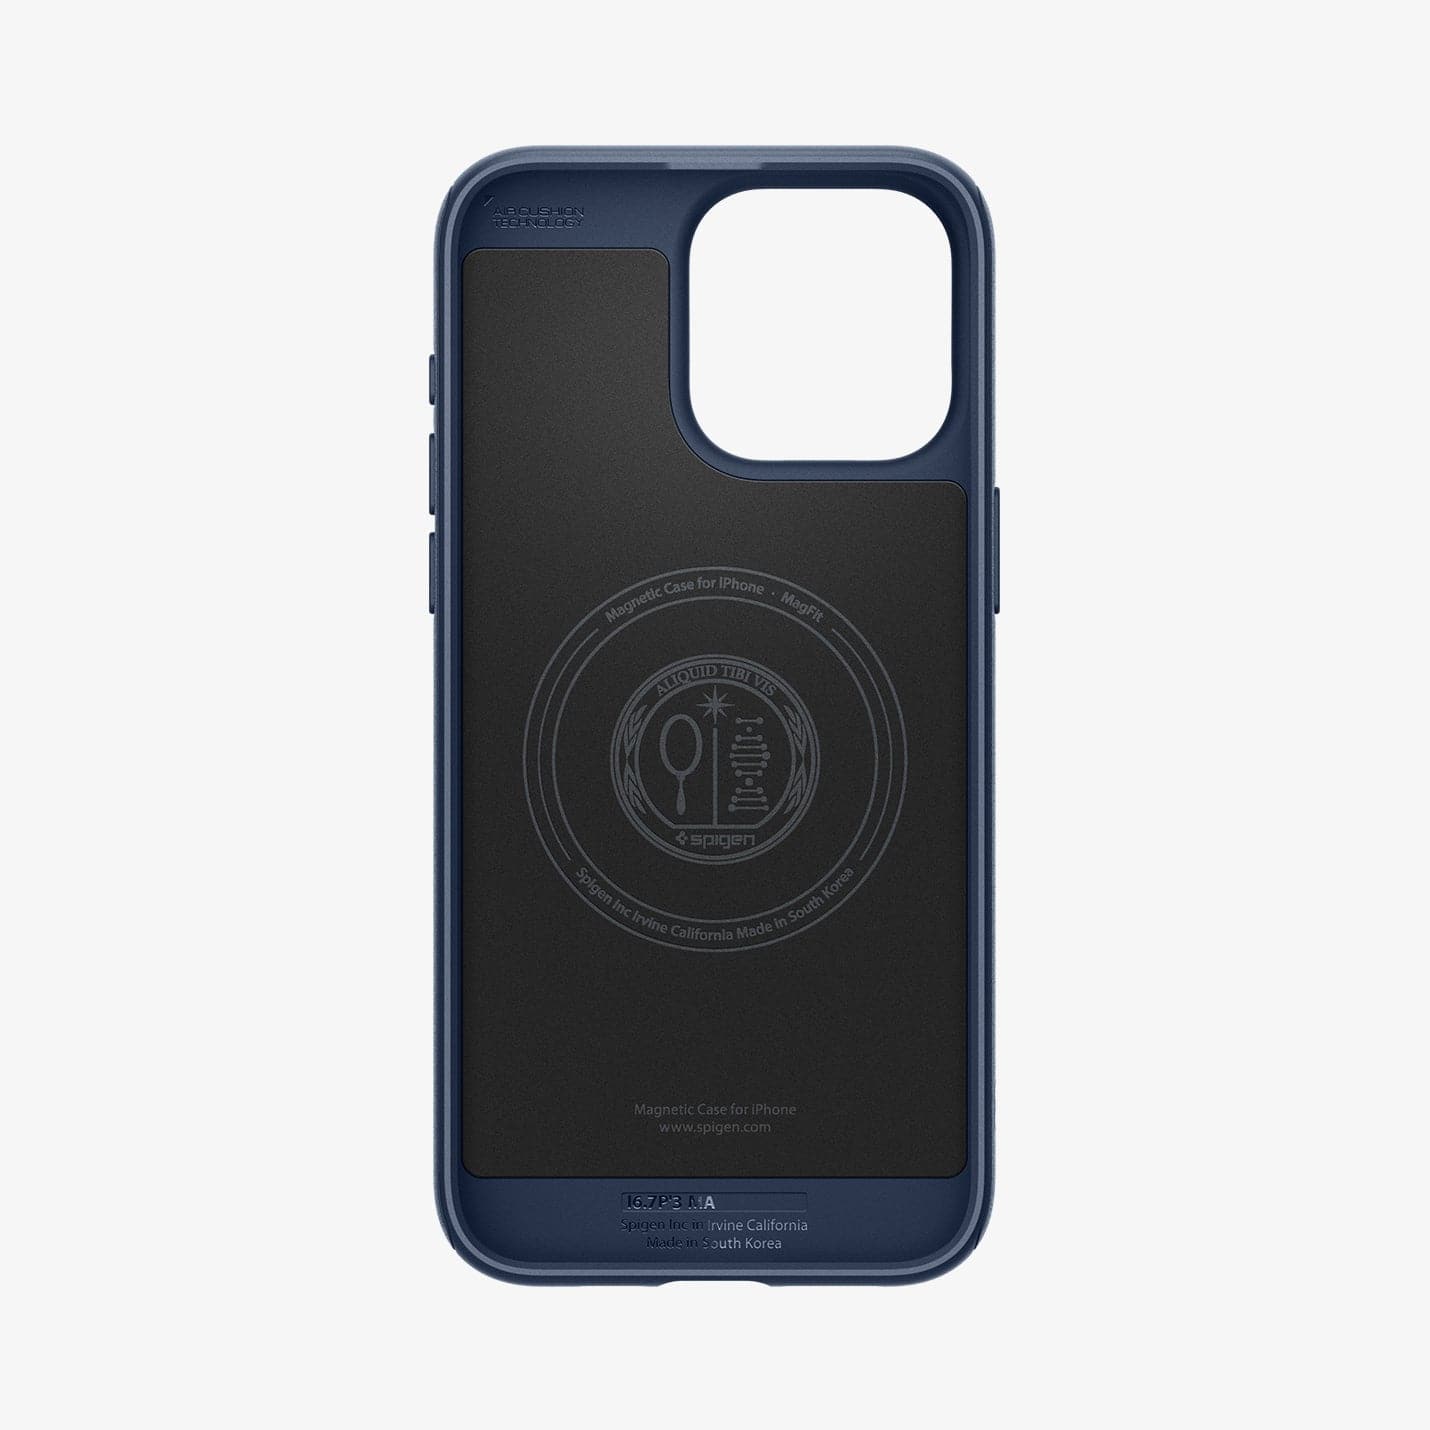 ACS06598 - iPhone 15 Pro Max Case Mag Armor (MagFit) in navy blue showing the inside of case